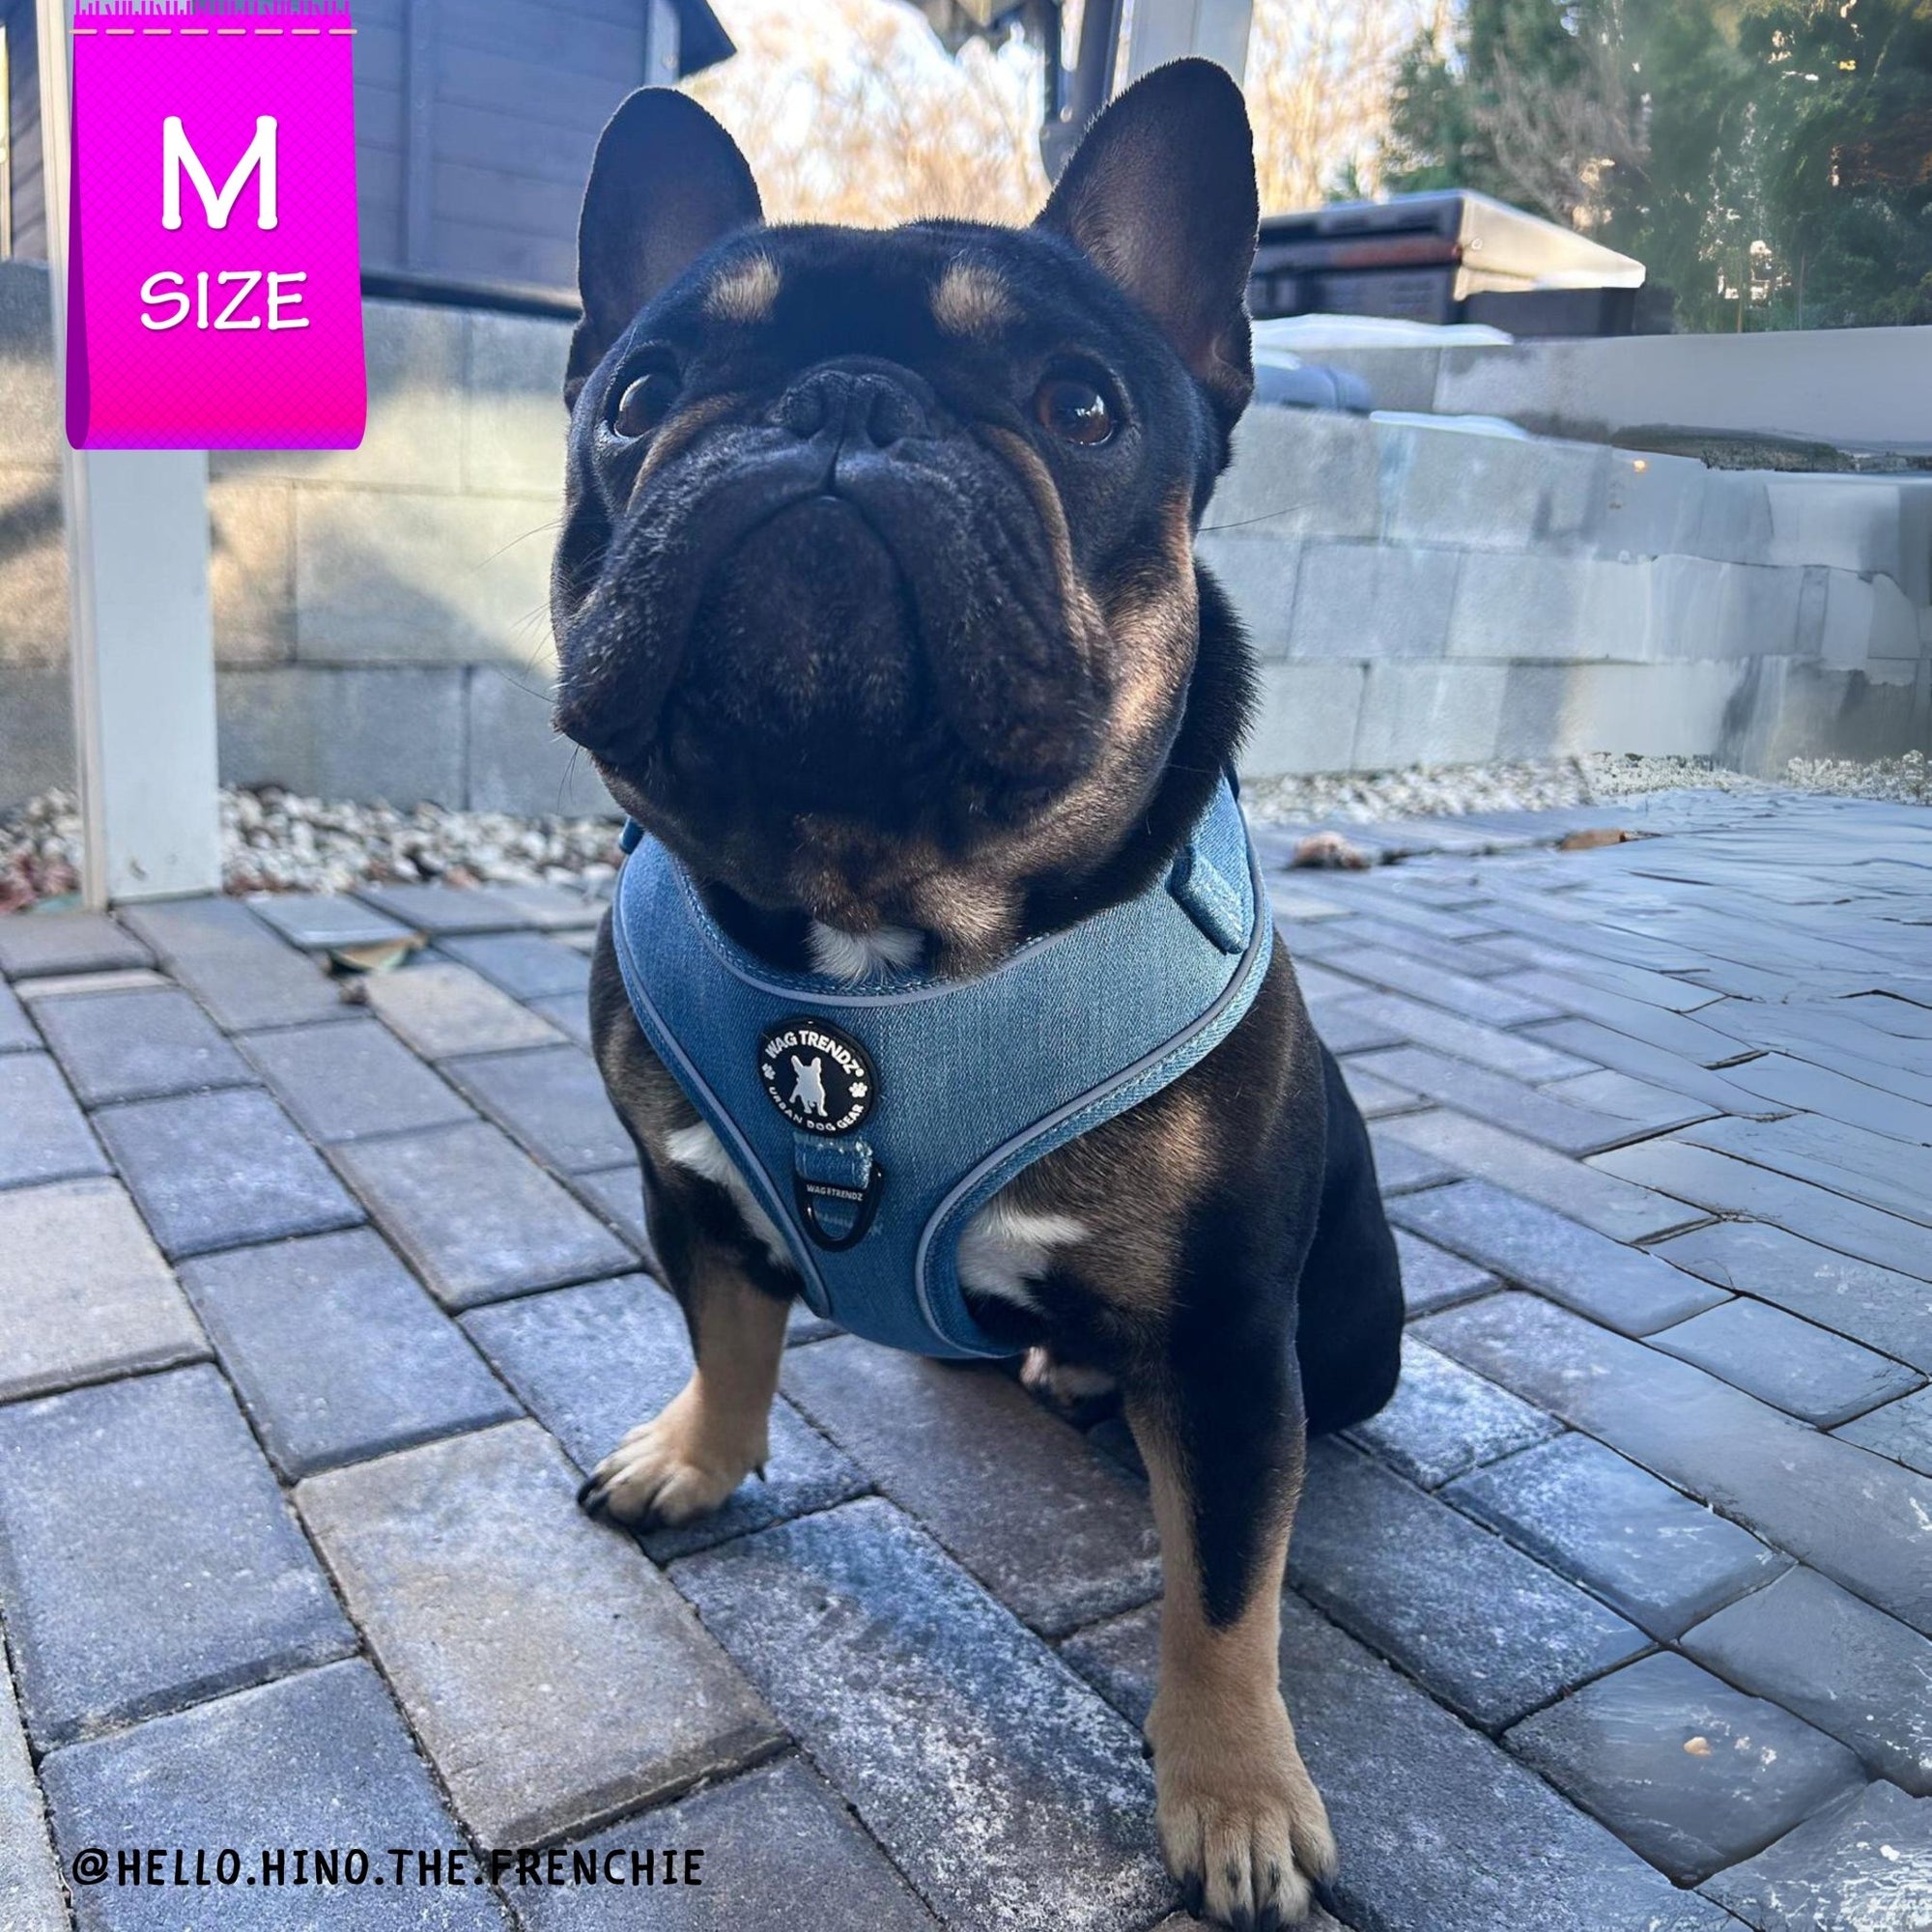 Harness and Leash Set + Poop Bag Holder - French Bulldog wearing Downtown Denim Dog Harness with reflective accents - standing on pebble sidewalk - Wag Trendz